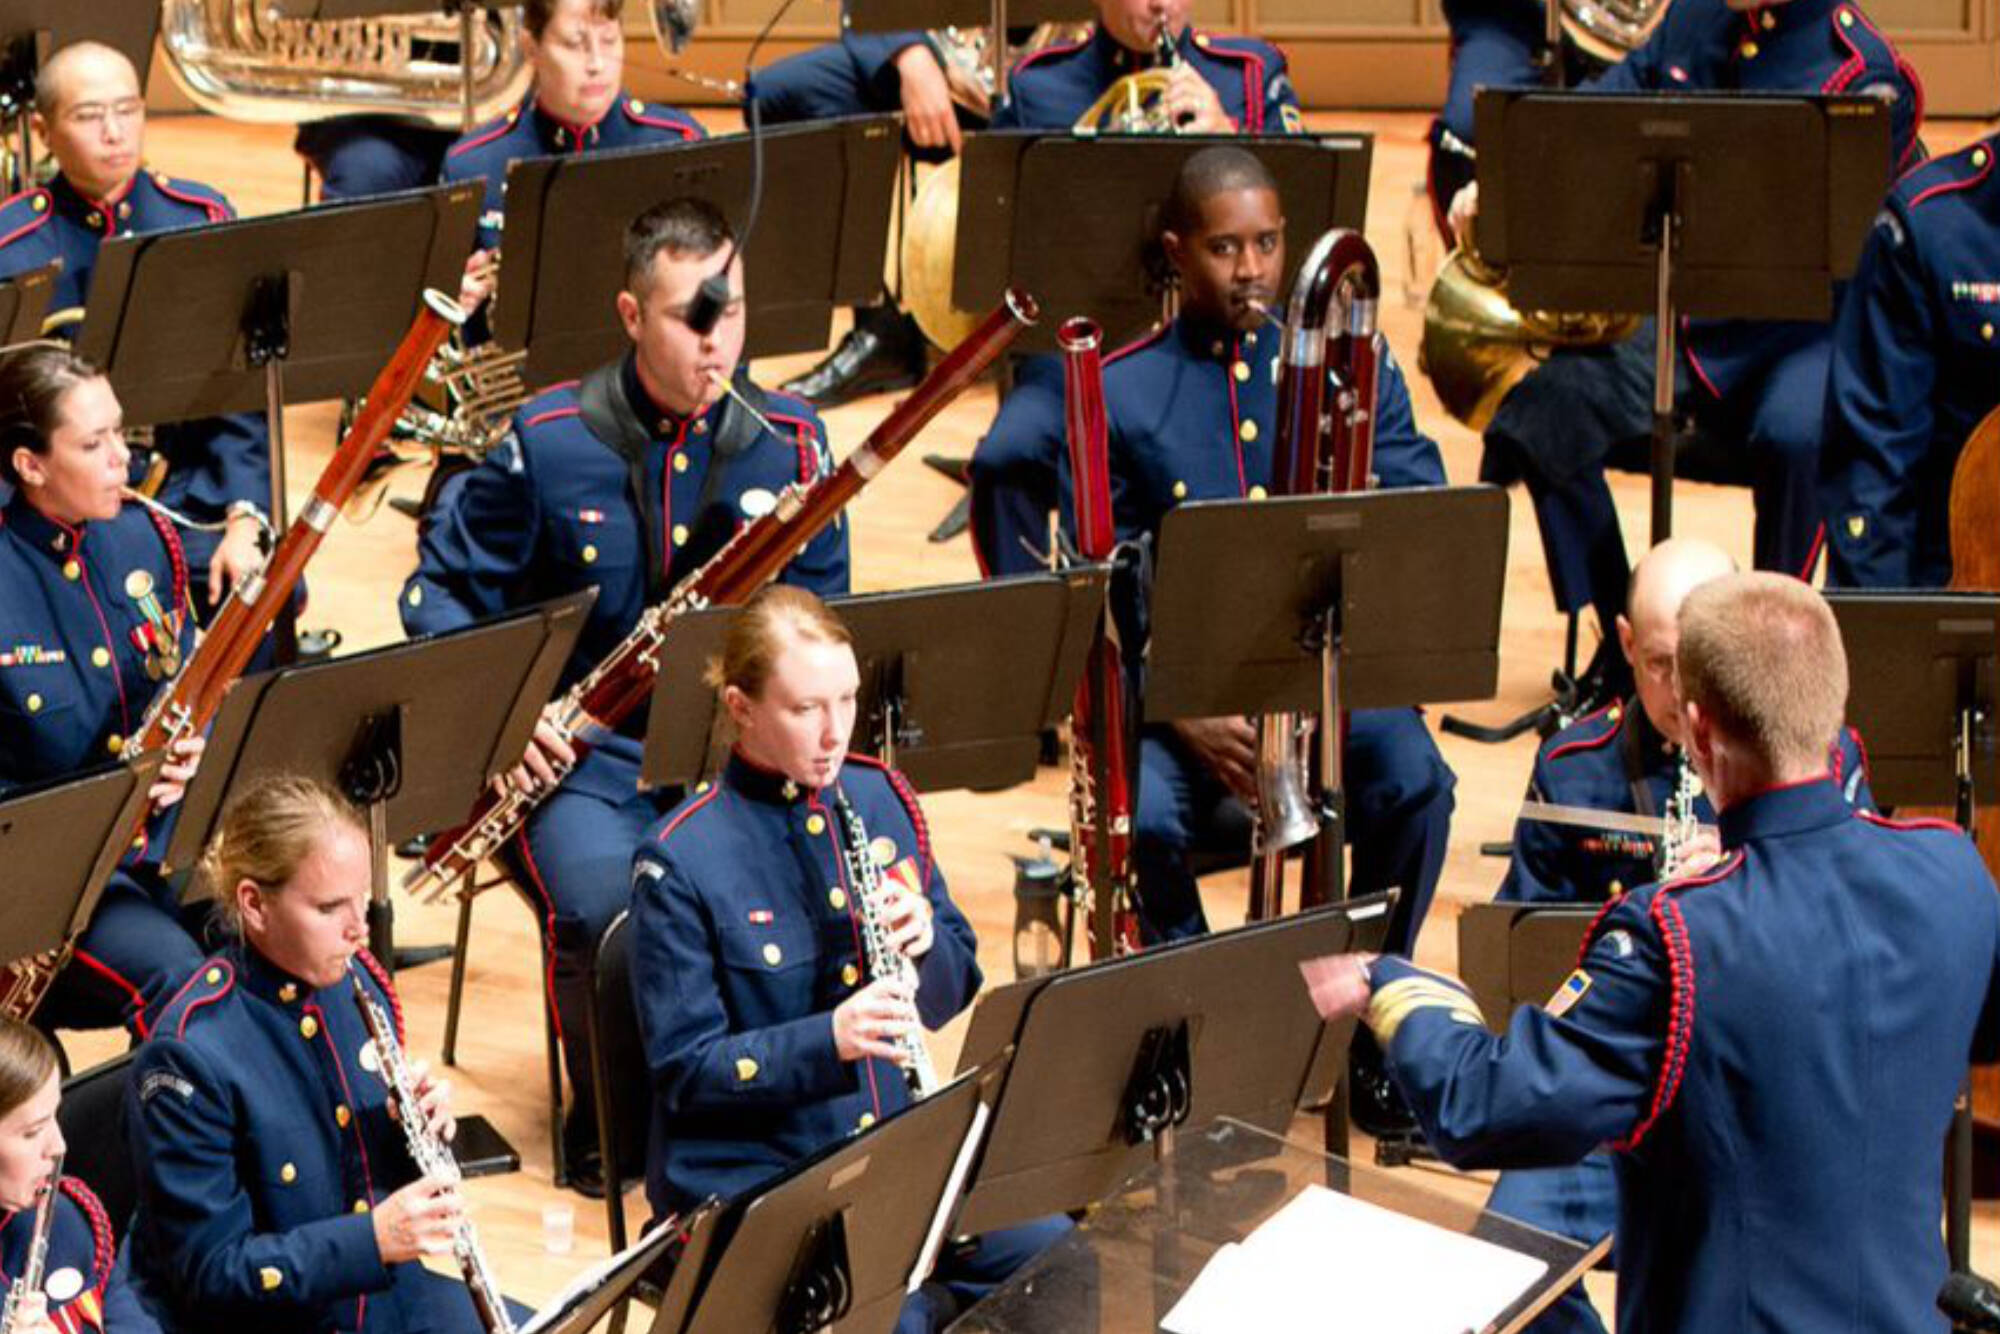 The Coast Guard Band, seen here, plays as a 55-member ensemble. The band will be traveling through Juneau and Anchorage in April as part of their “Ready for the Call” tour. (Courtesy Photo / U.S. Coast Guard)